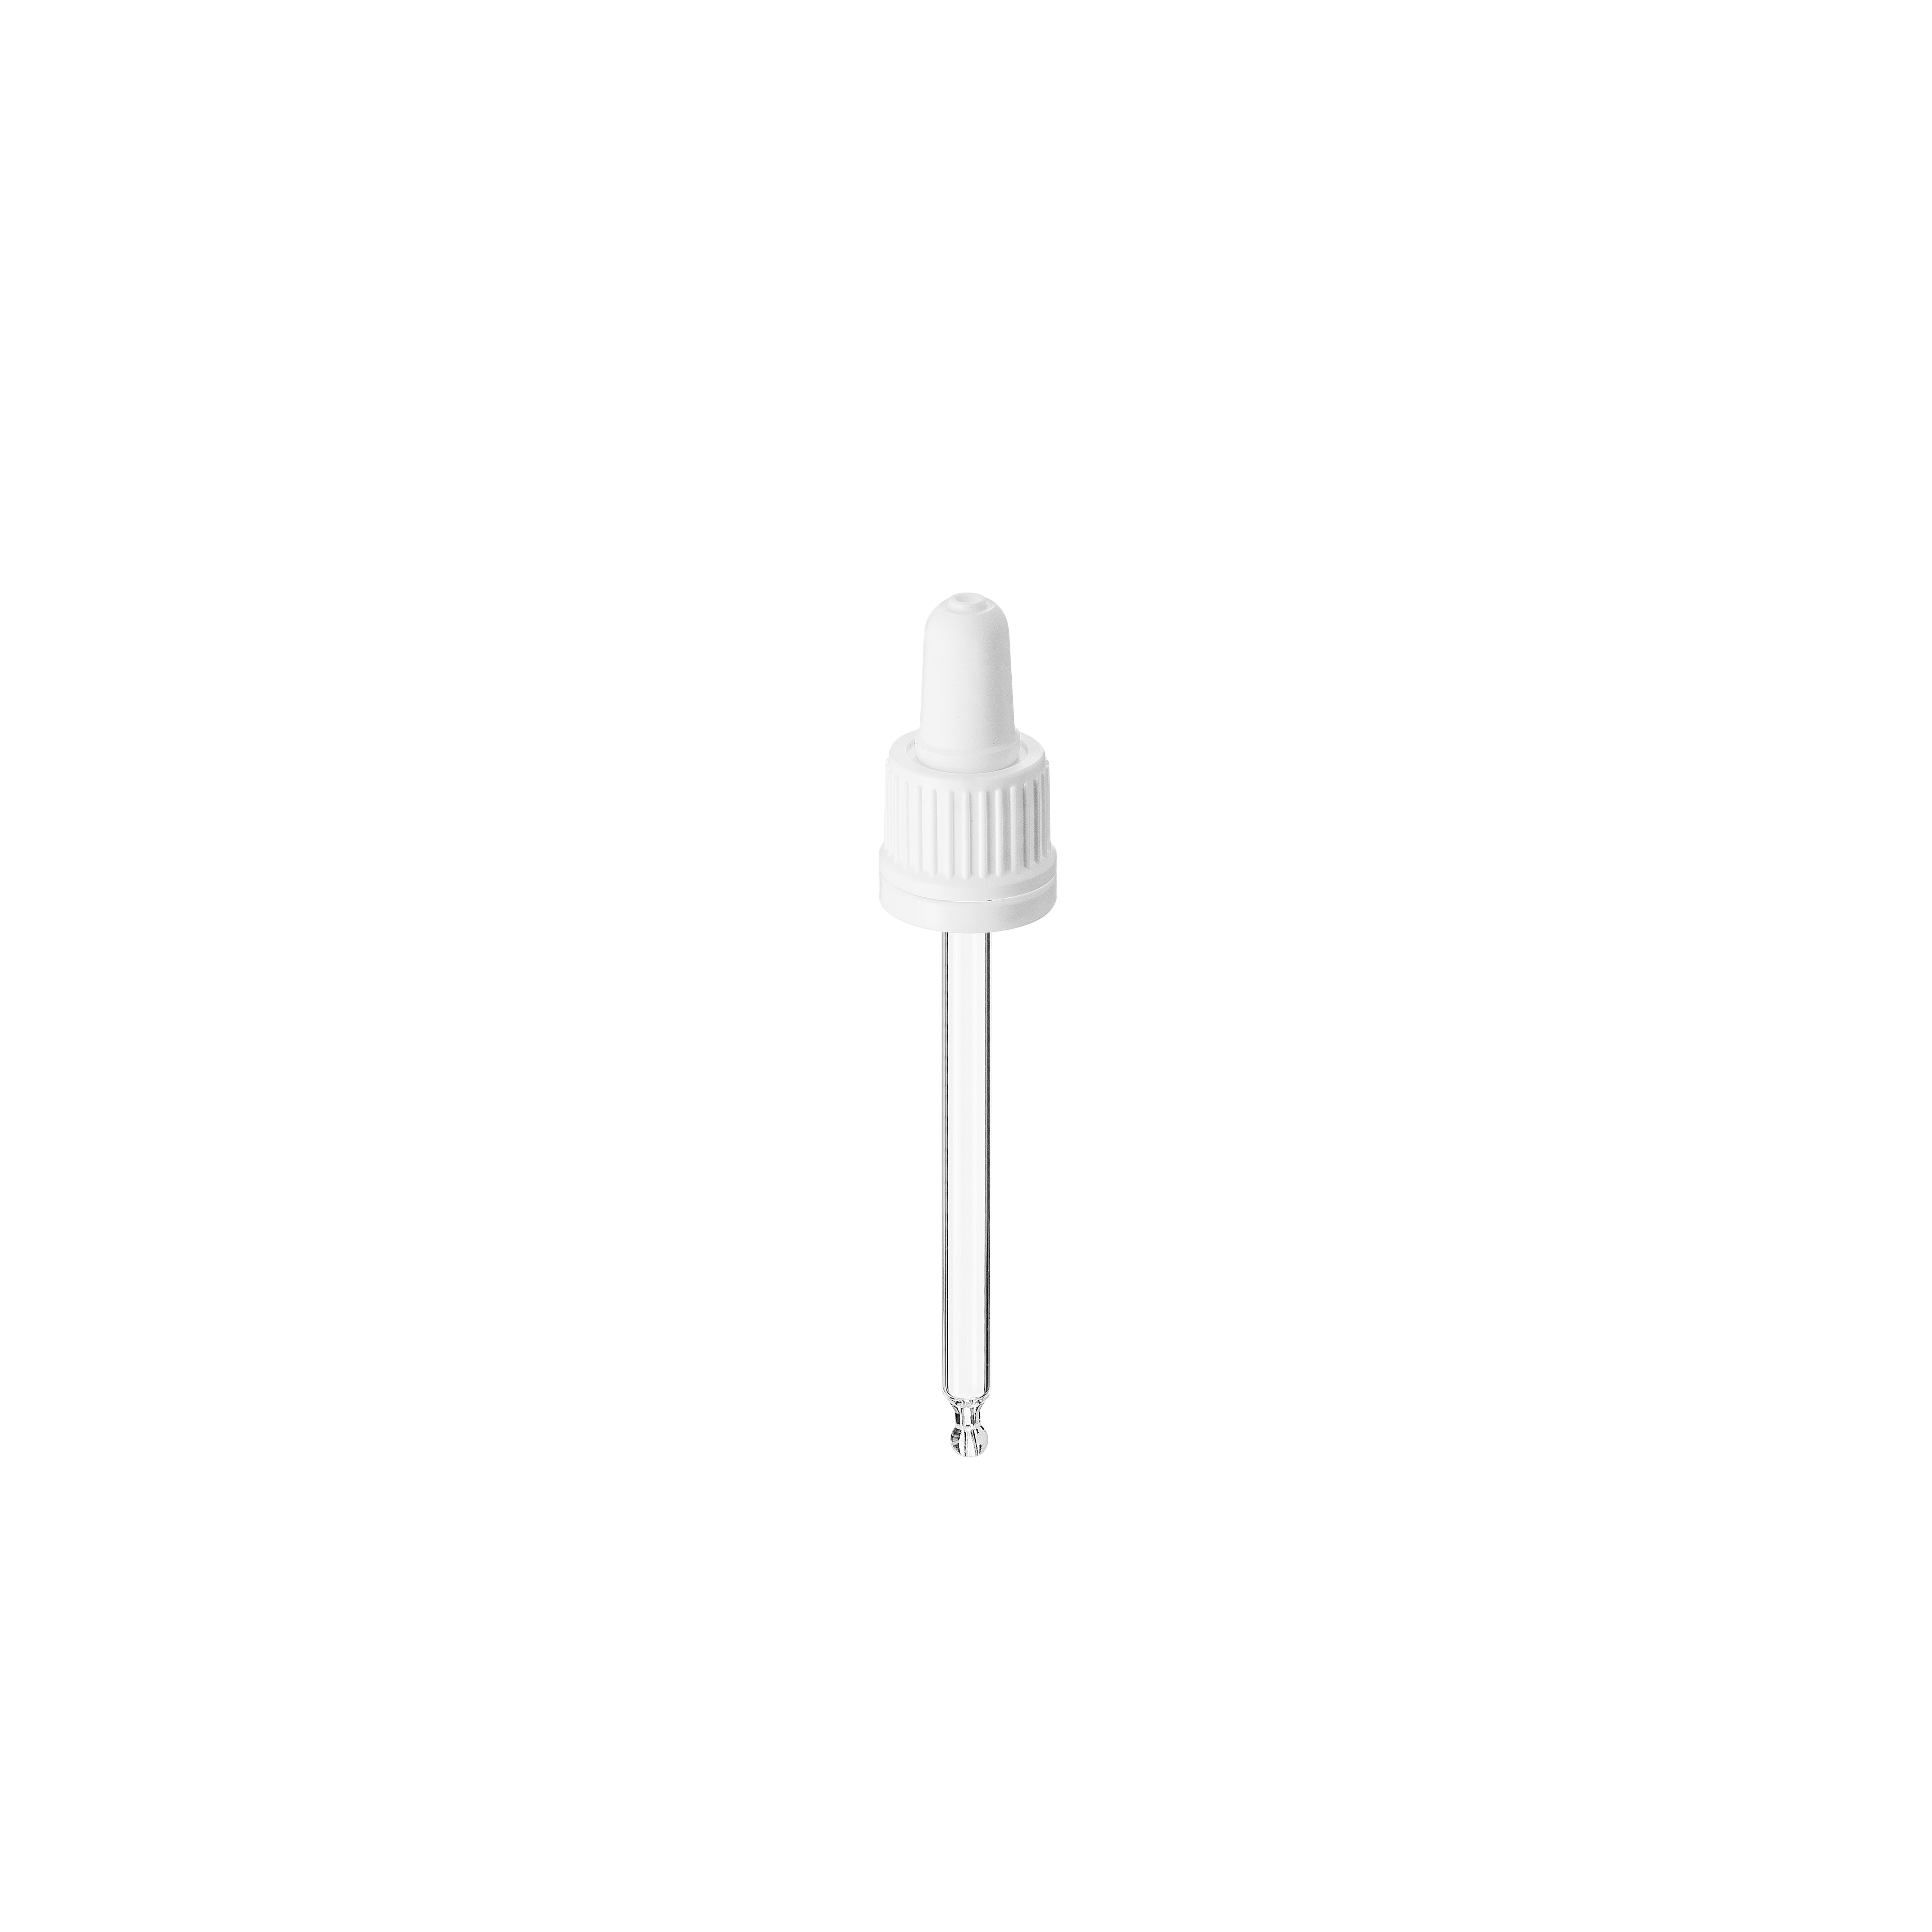 Pipette series II, DIN18, tamper-evident, PP, white, ribbed, white bulb TPE 0.7 ml, bent ball tip with 1.0 opening for Ginger 100 ml